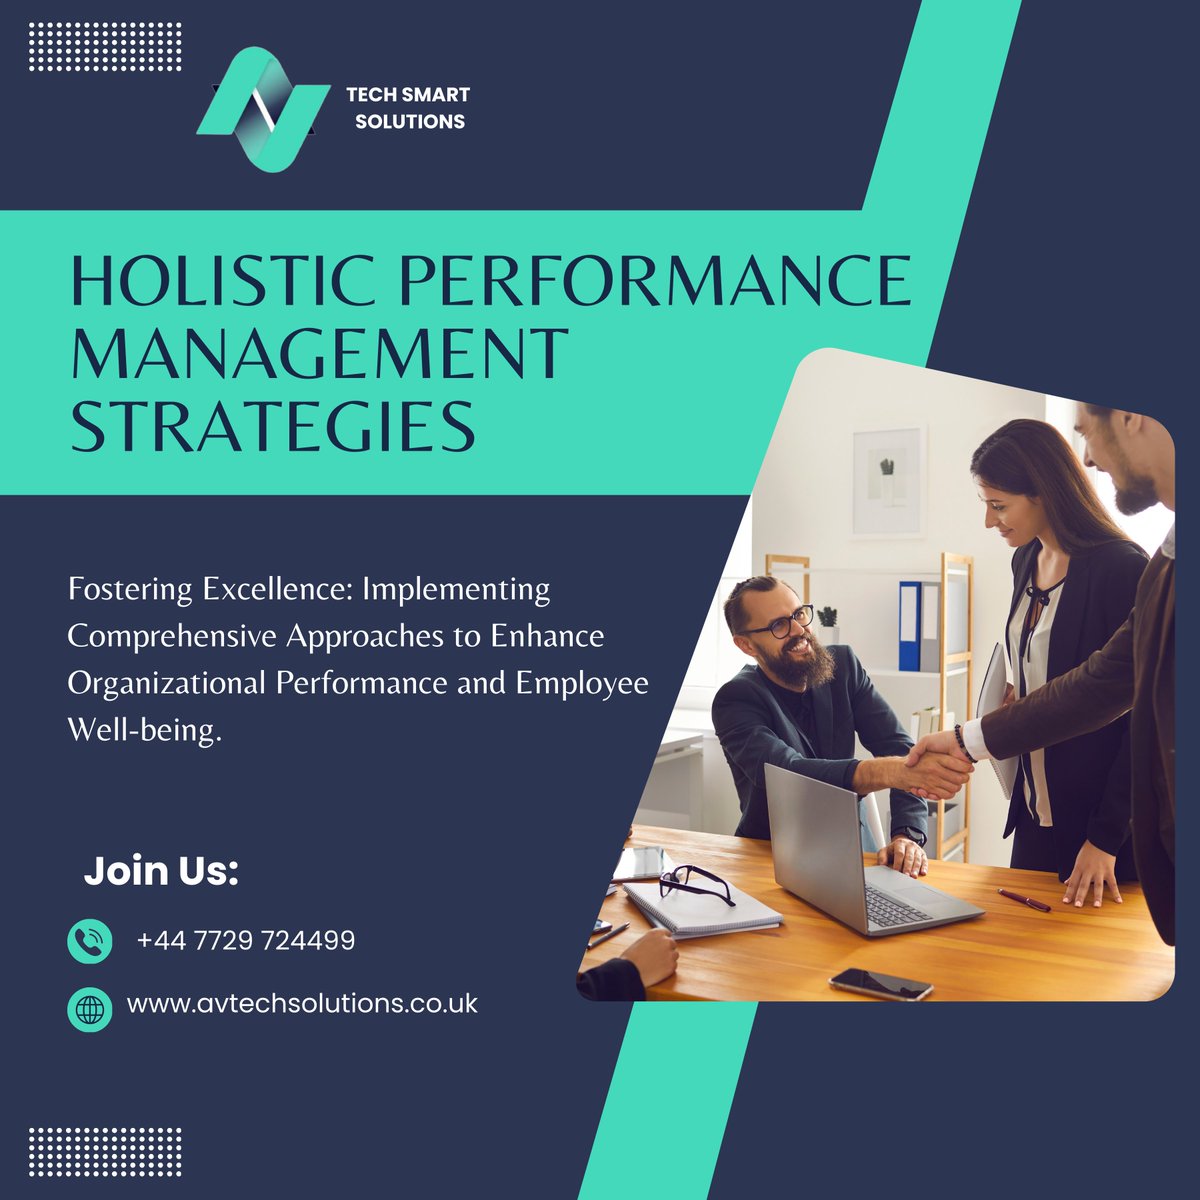 Holistic management involves a comprehensive, balanced approach to optimize organizational performance by integrating people, processes, and systems for sustainable success.
📞 Contact us at +44 7729 724499
🌐 Learn more at : avtechsolutions.co.uk/optimize-organ…
#HolisticManagement